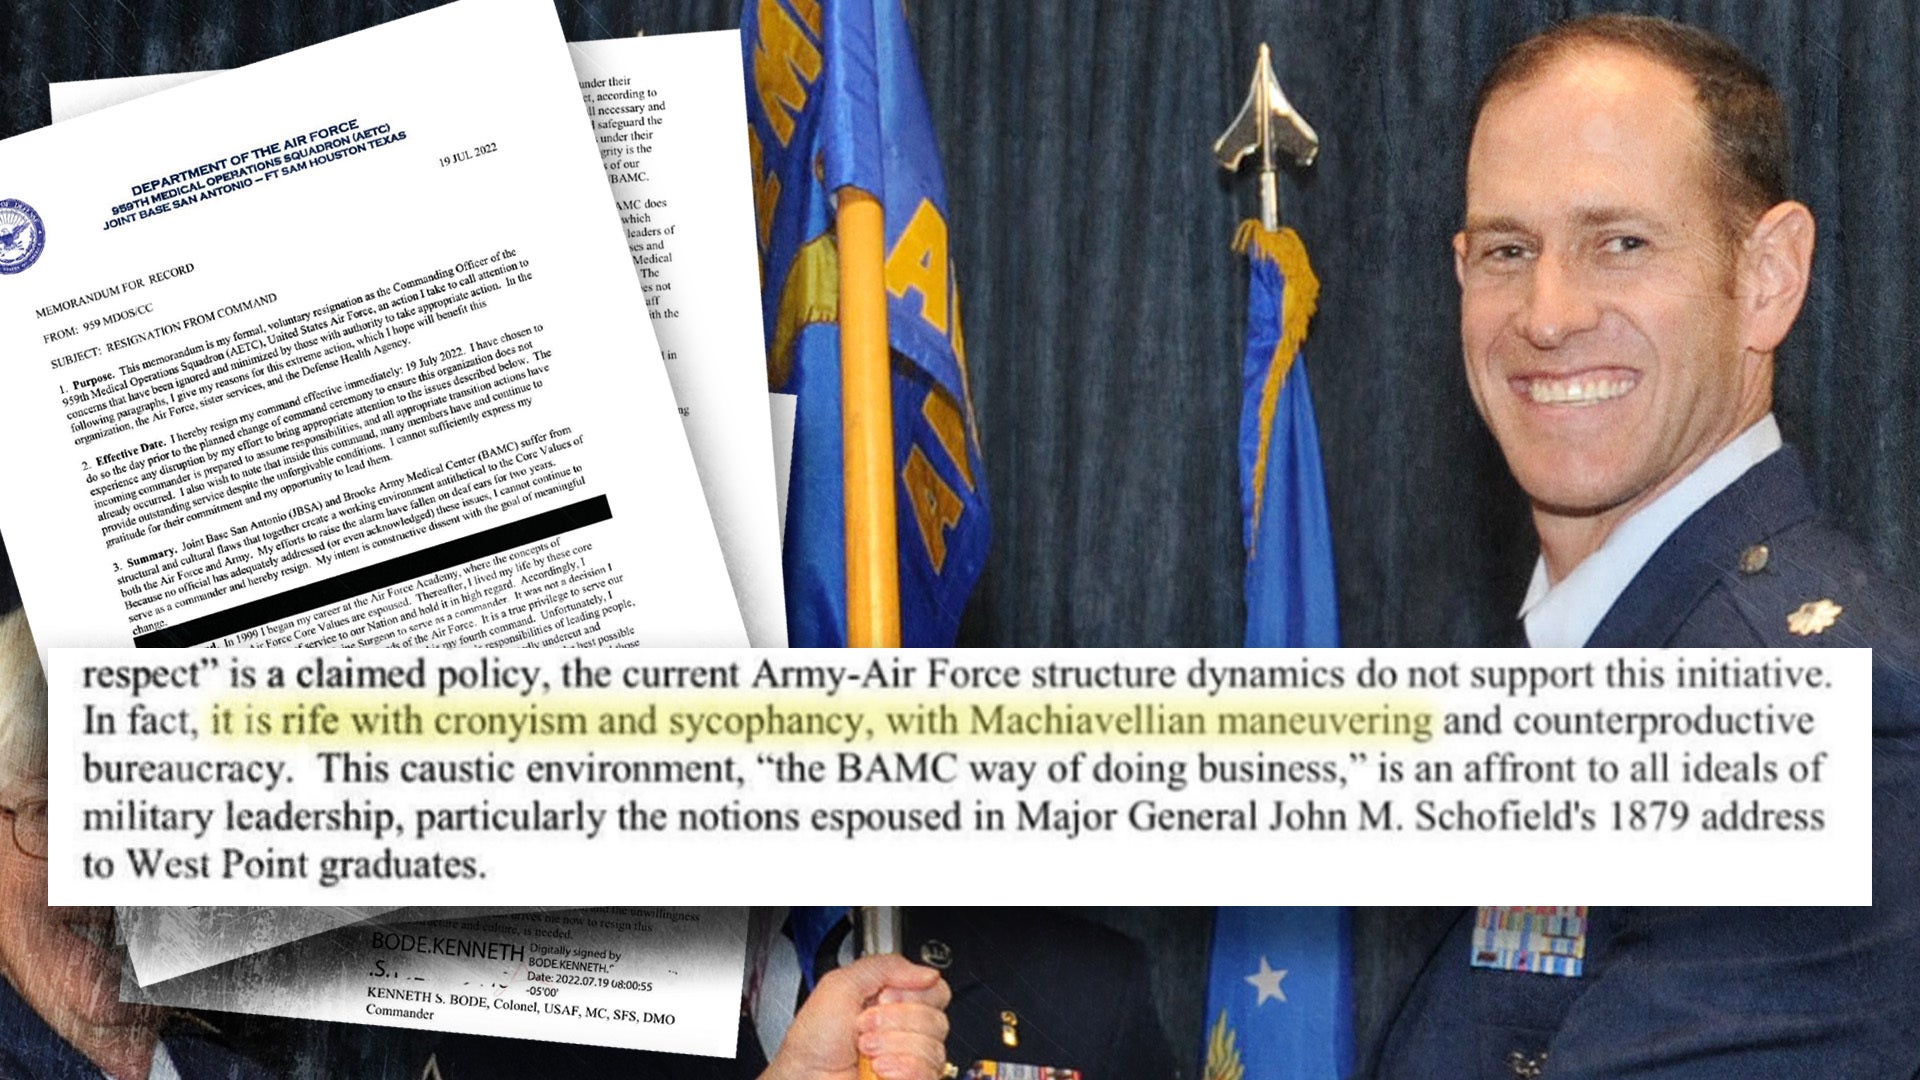 Air Force colonel goes scorched earth on fellow officers in fiery resignation letter